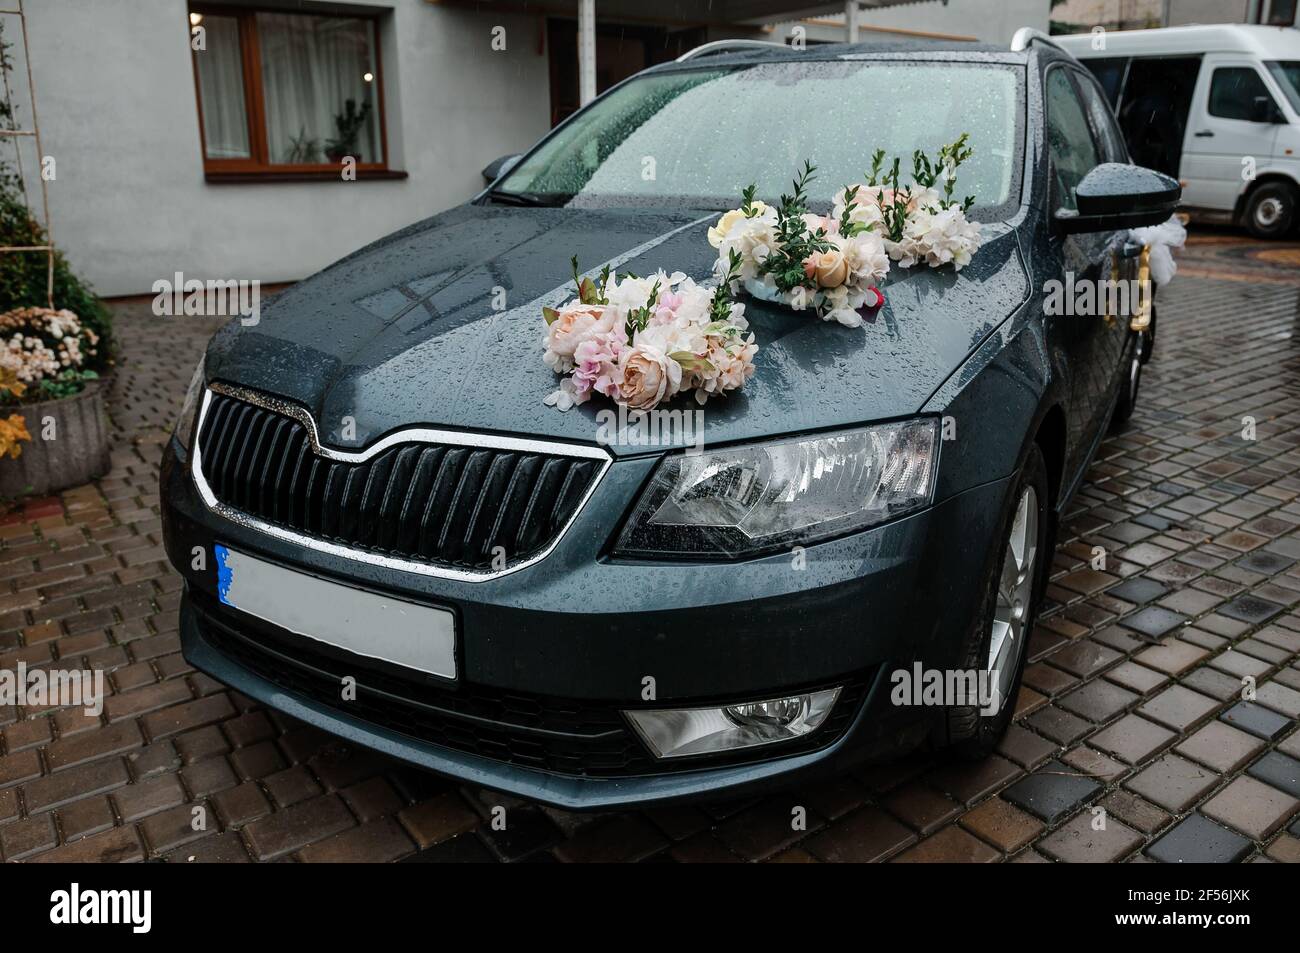 16+ Thousand Car Decorations Wedding Royalty-Free Images, Stock Photos &  Pictures